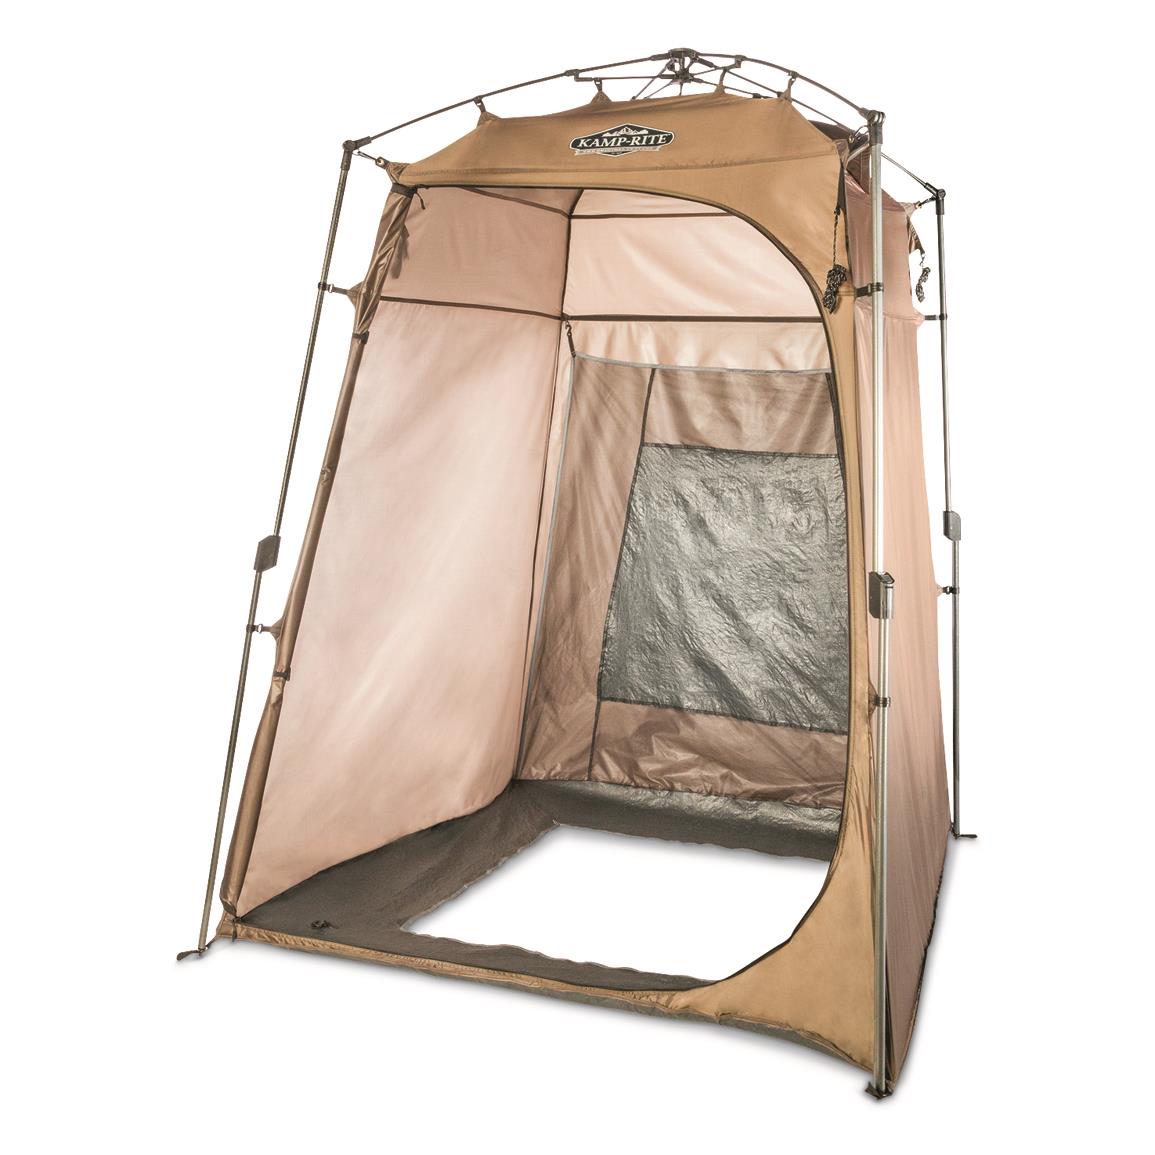 Kamp-Rite Privacy Shelter with Shower